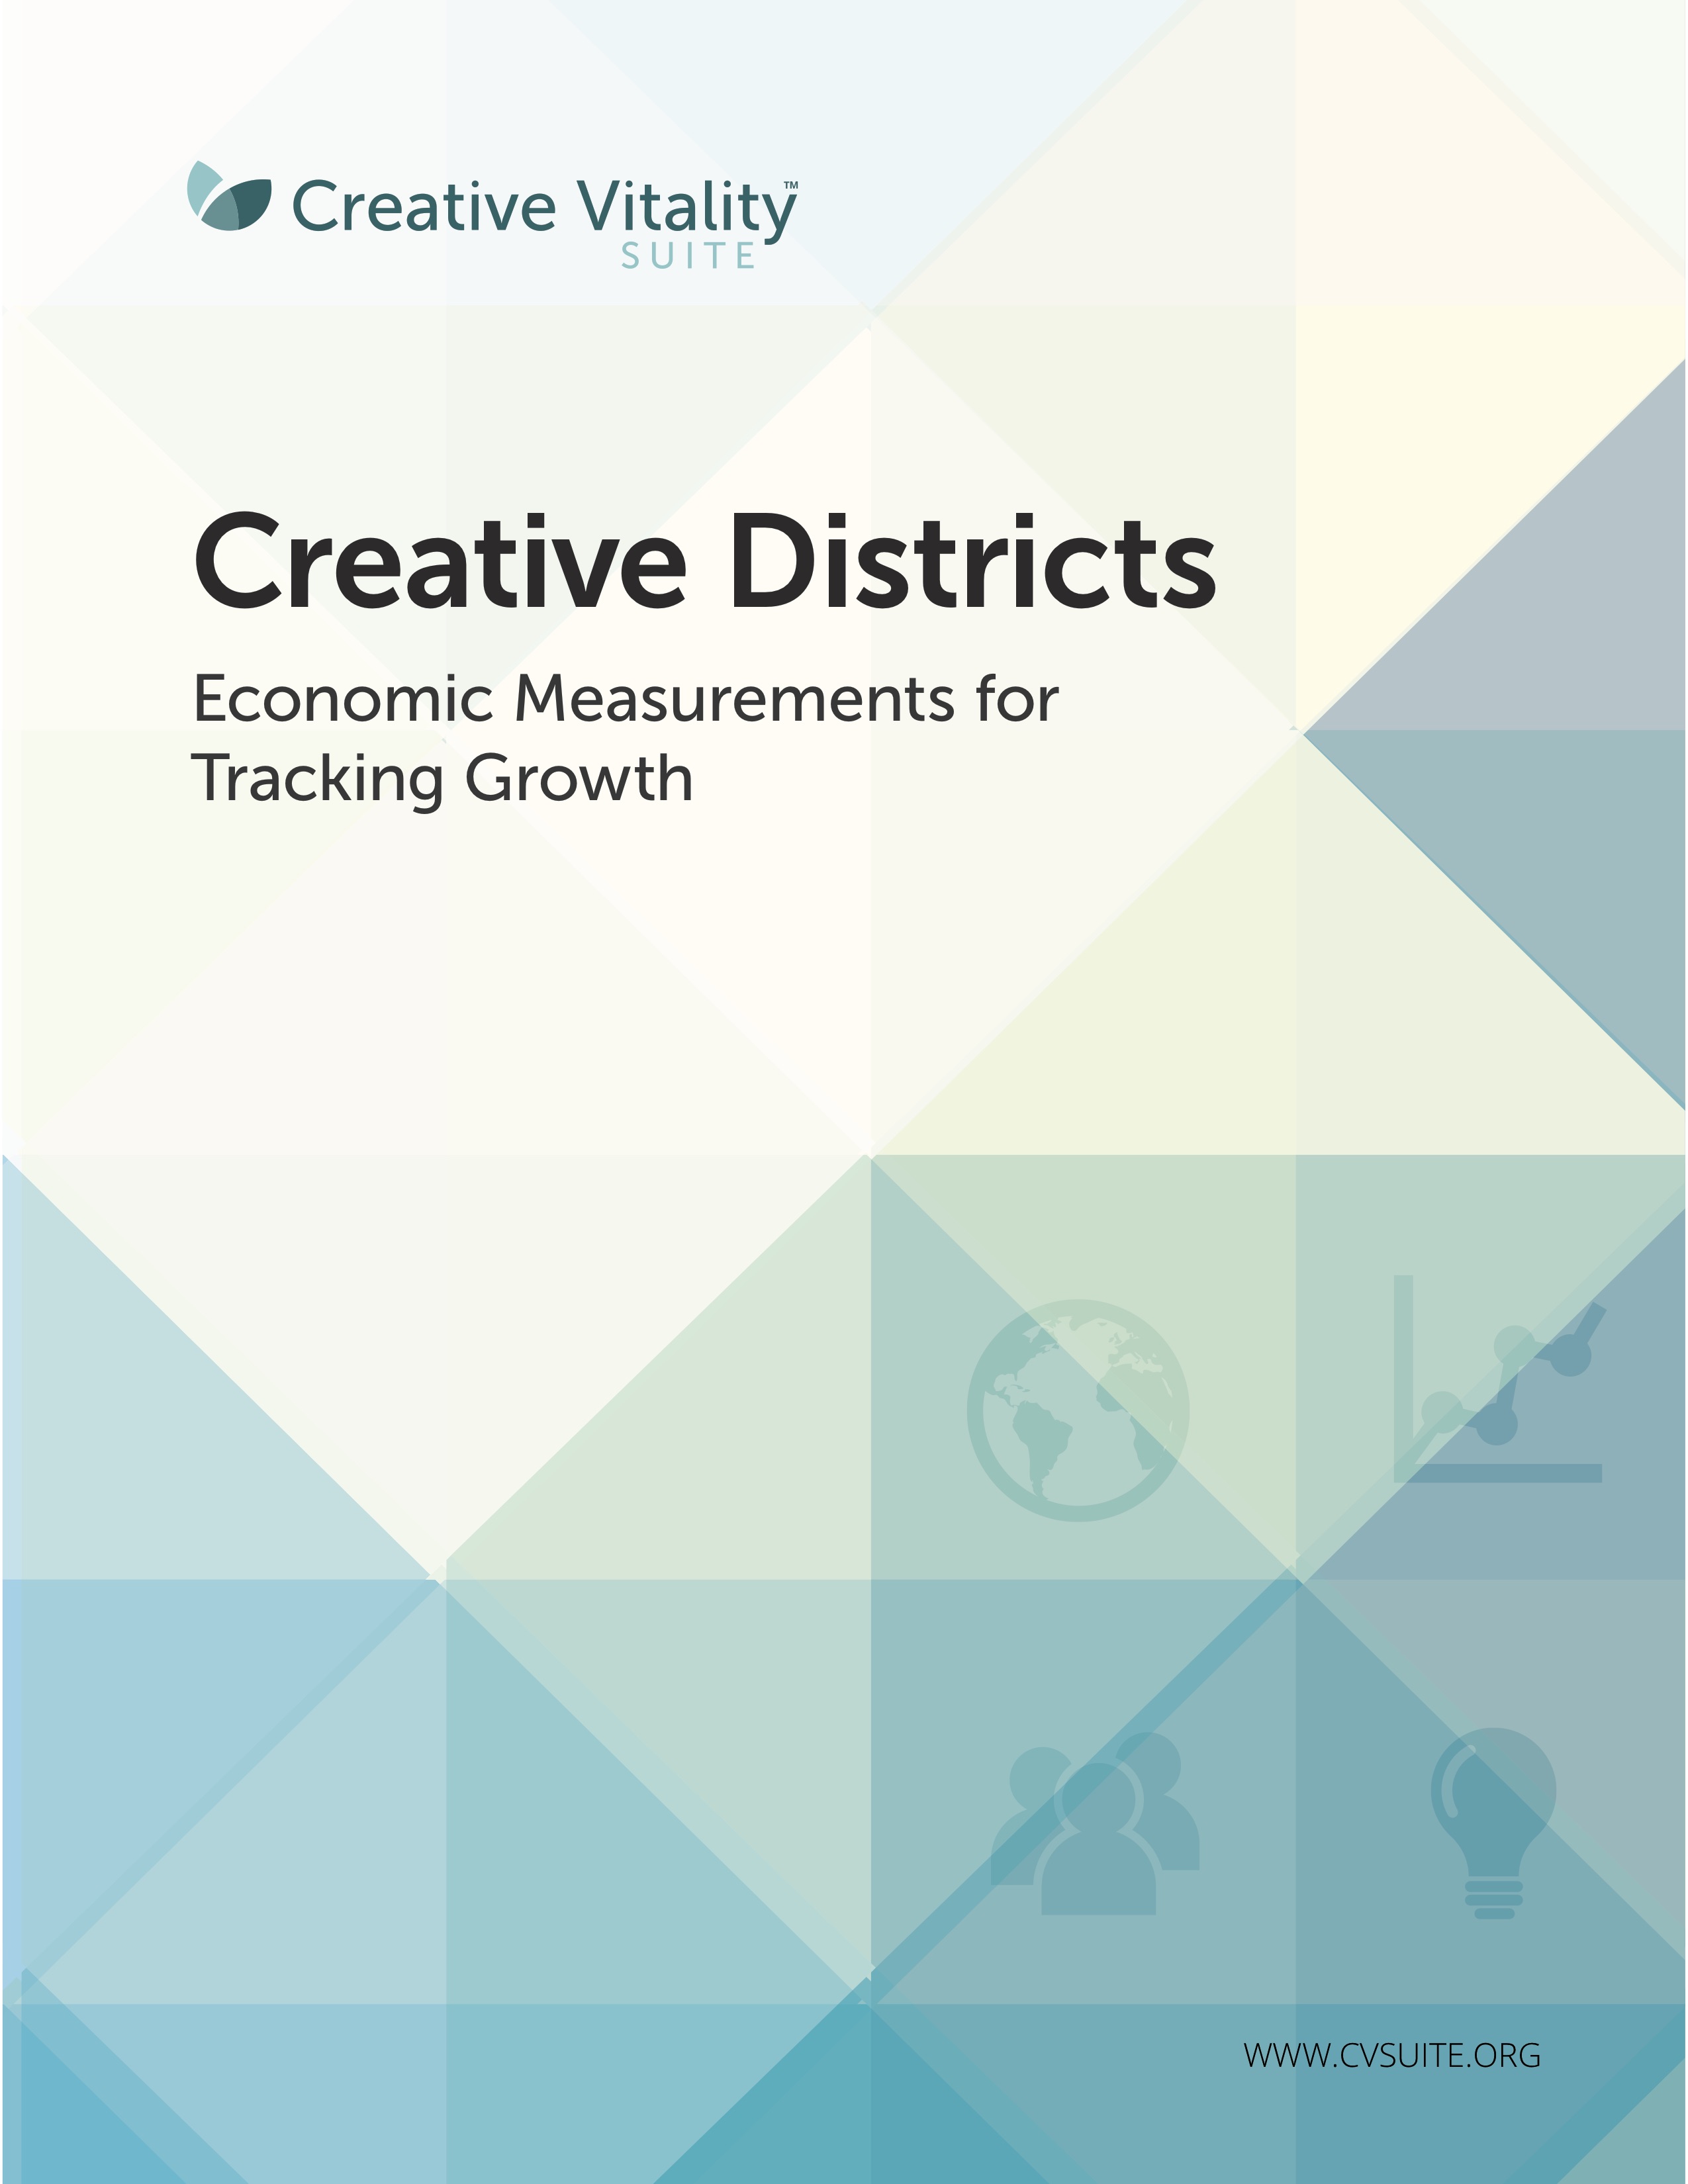 Cover of the Creative District Guide